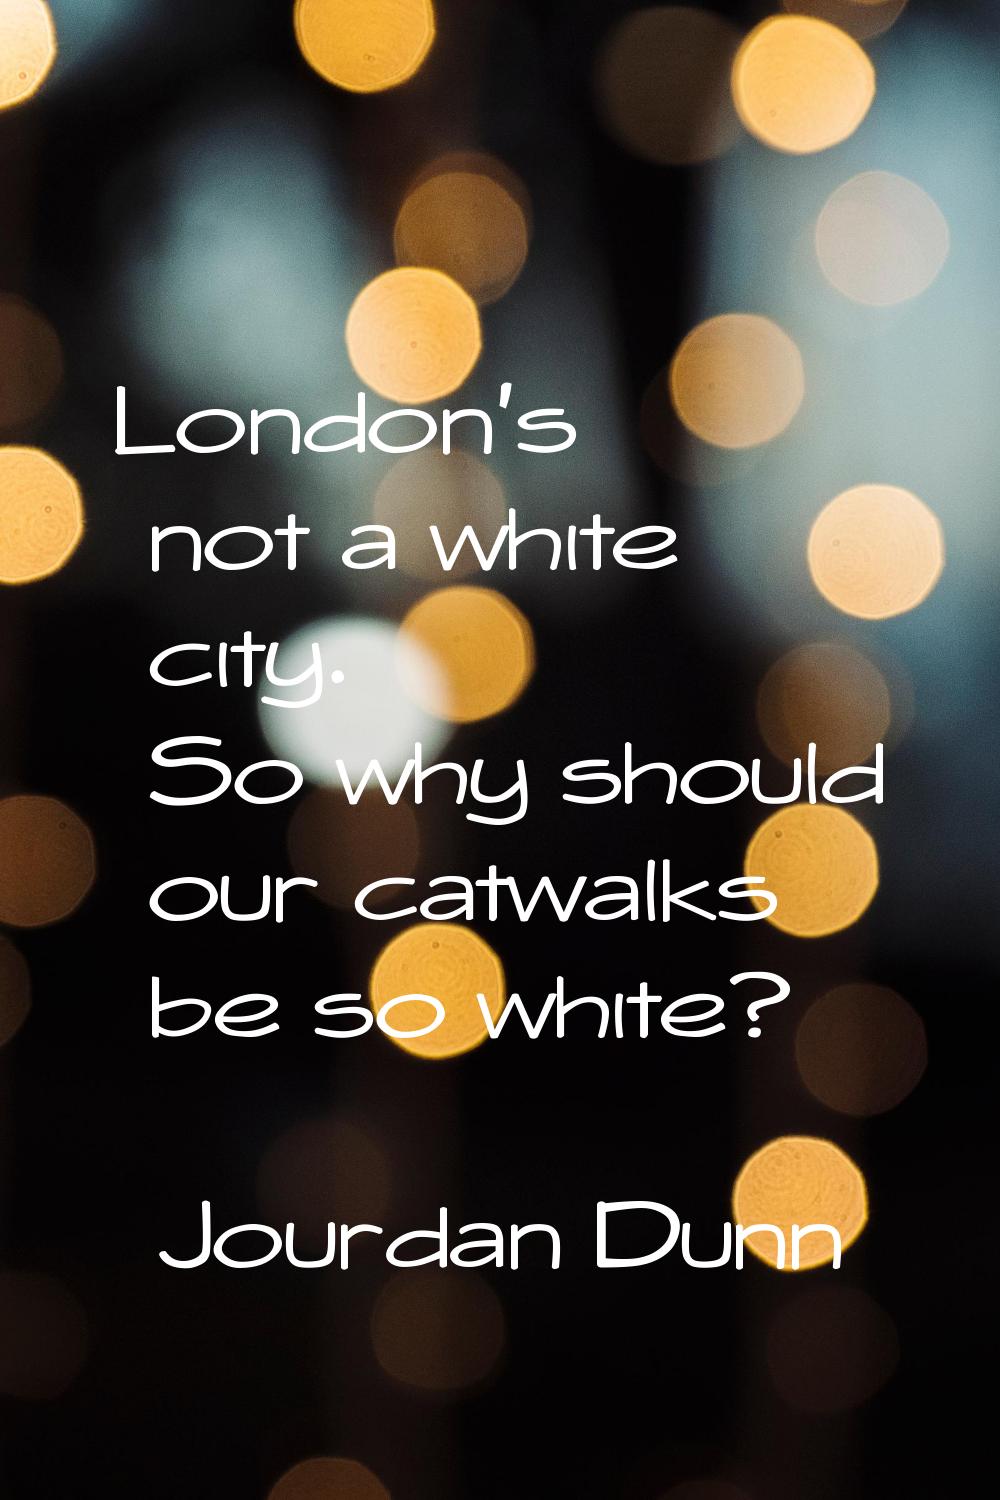 London's not a white city. So why should our catwalks be so white?